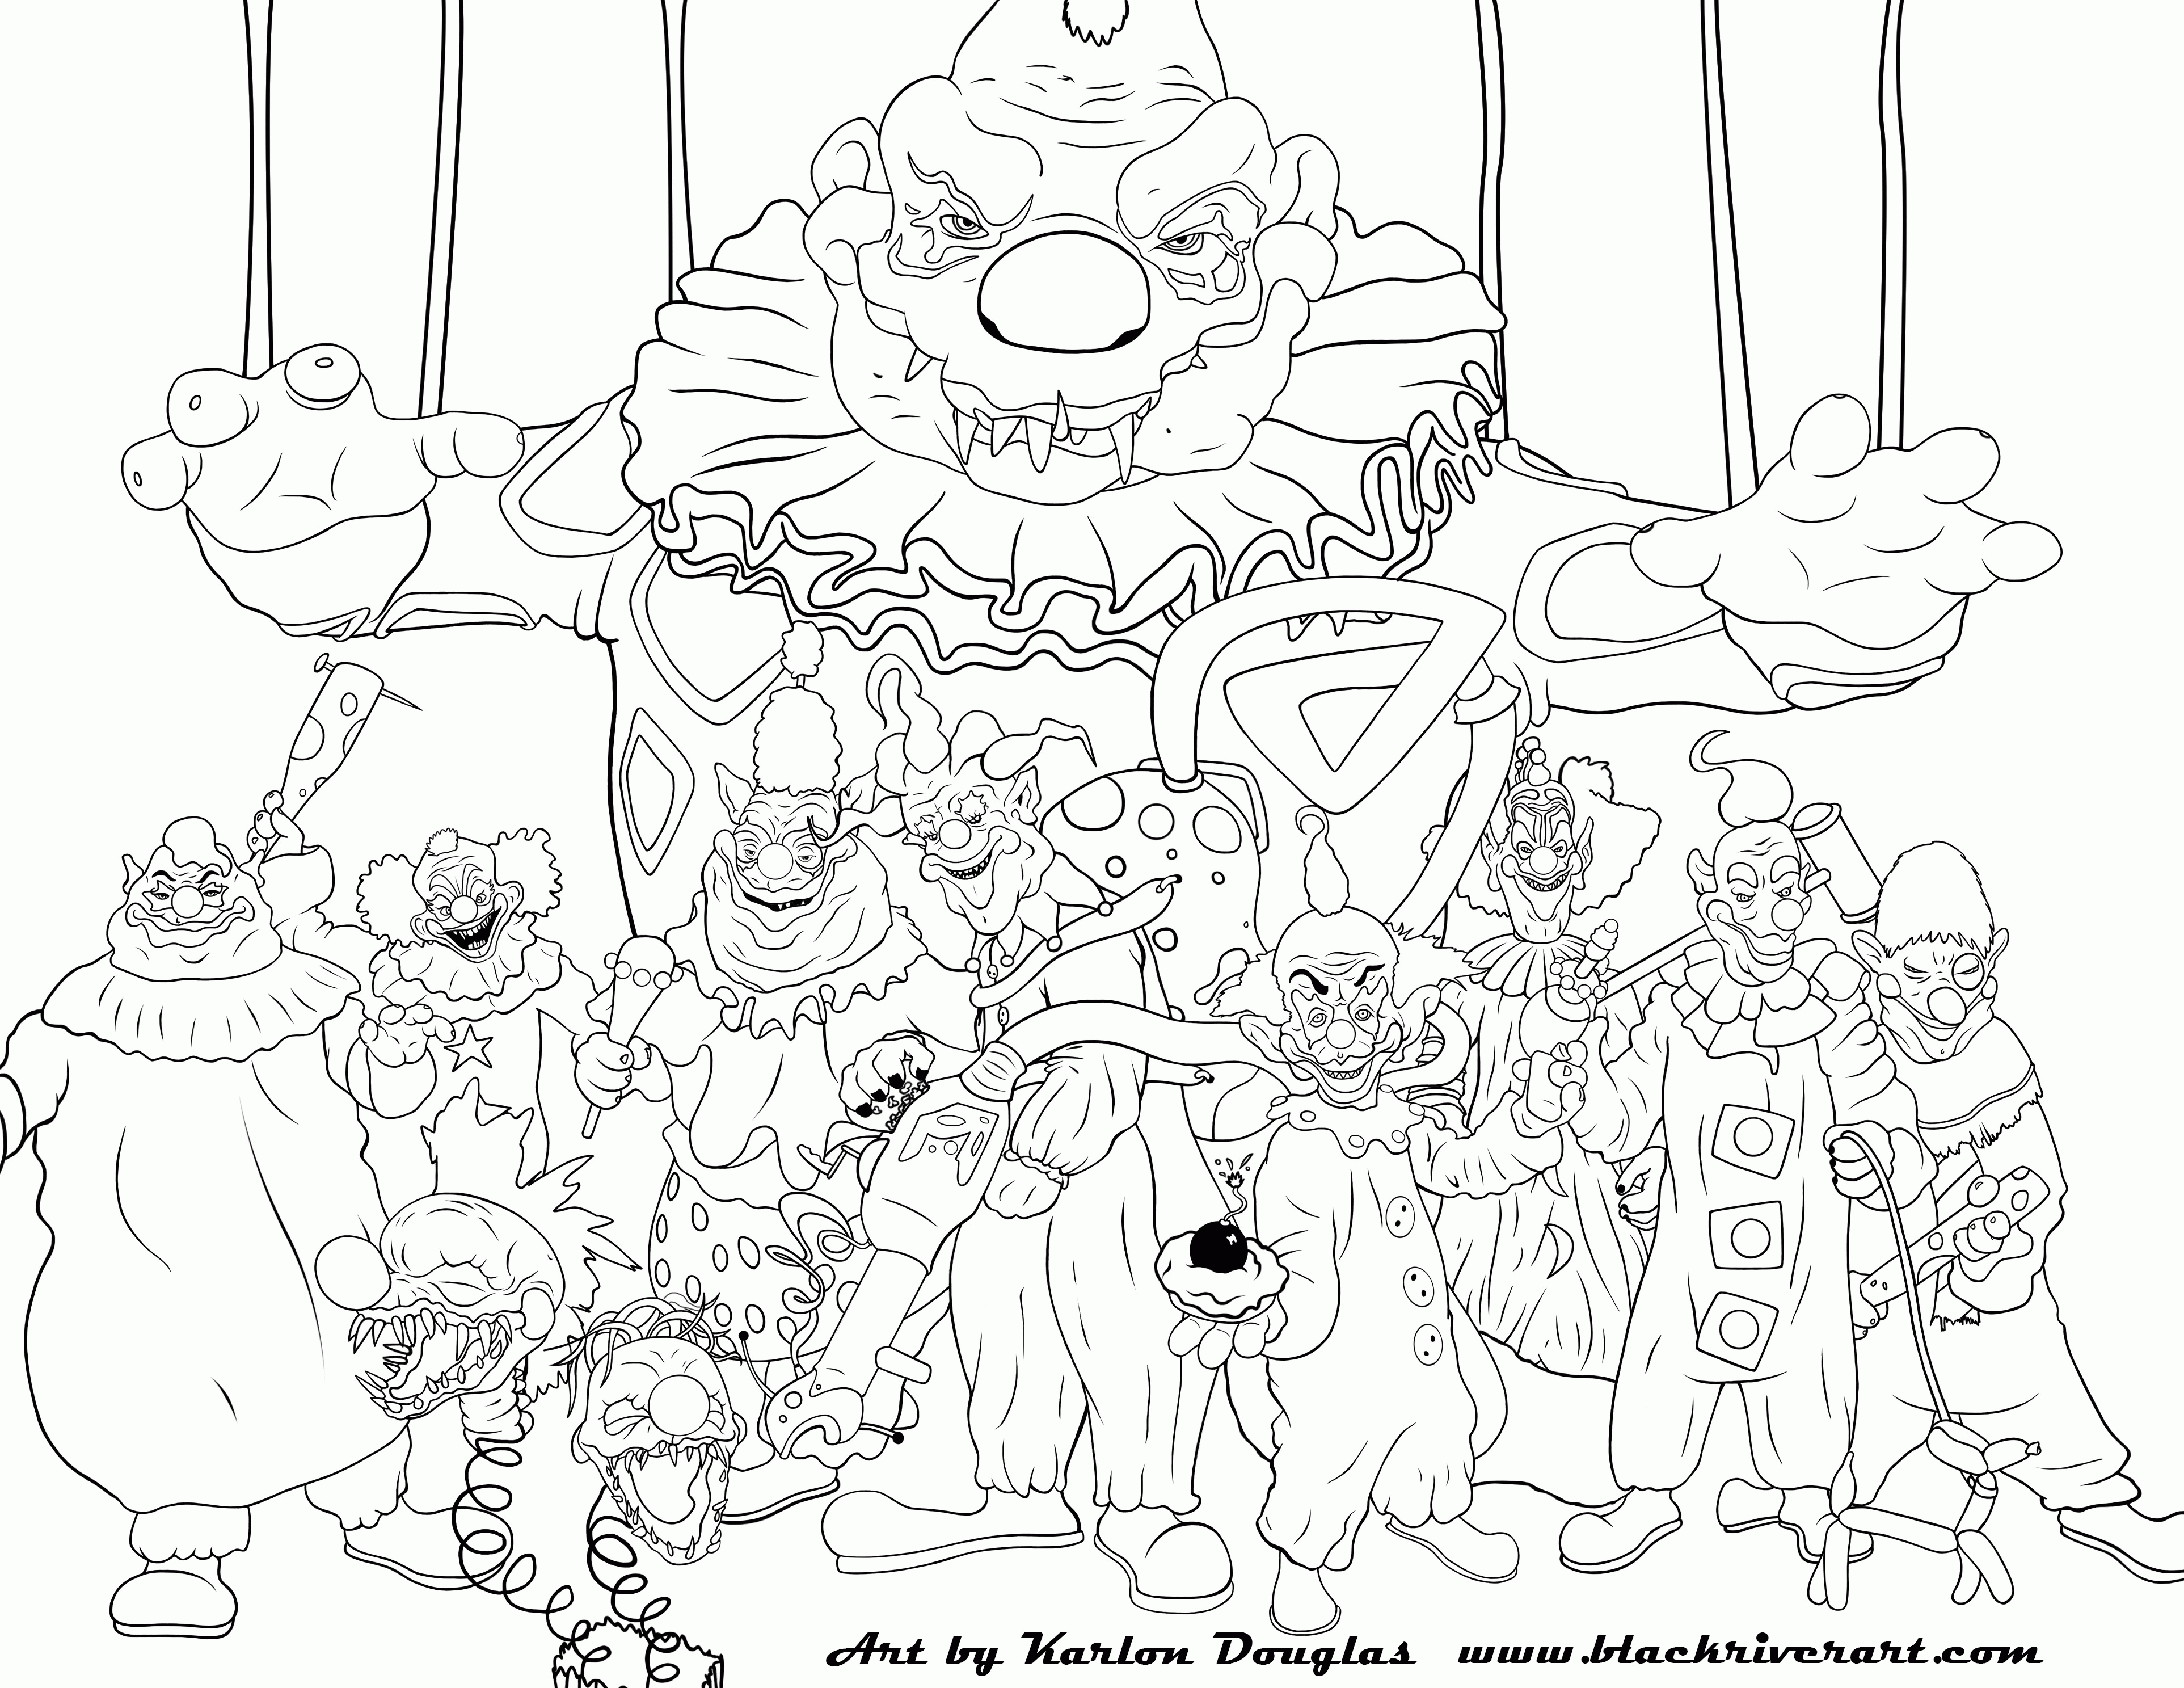 Disney Animal Kingdom Coloring Pages - Coloring Home